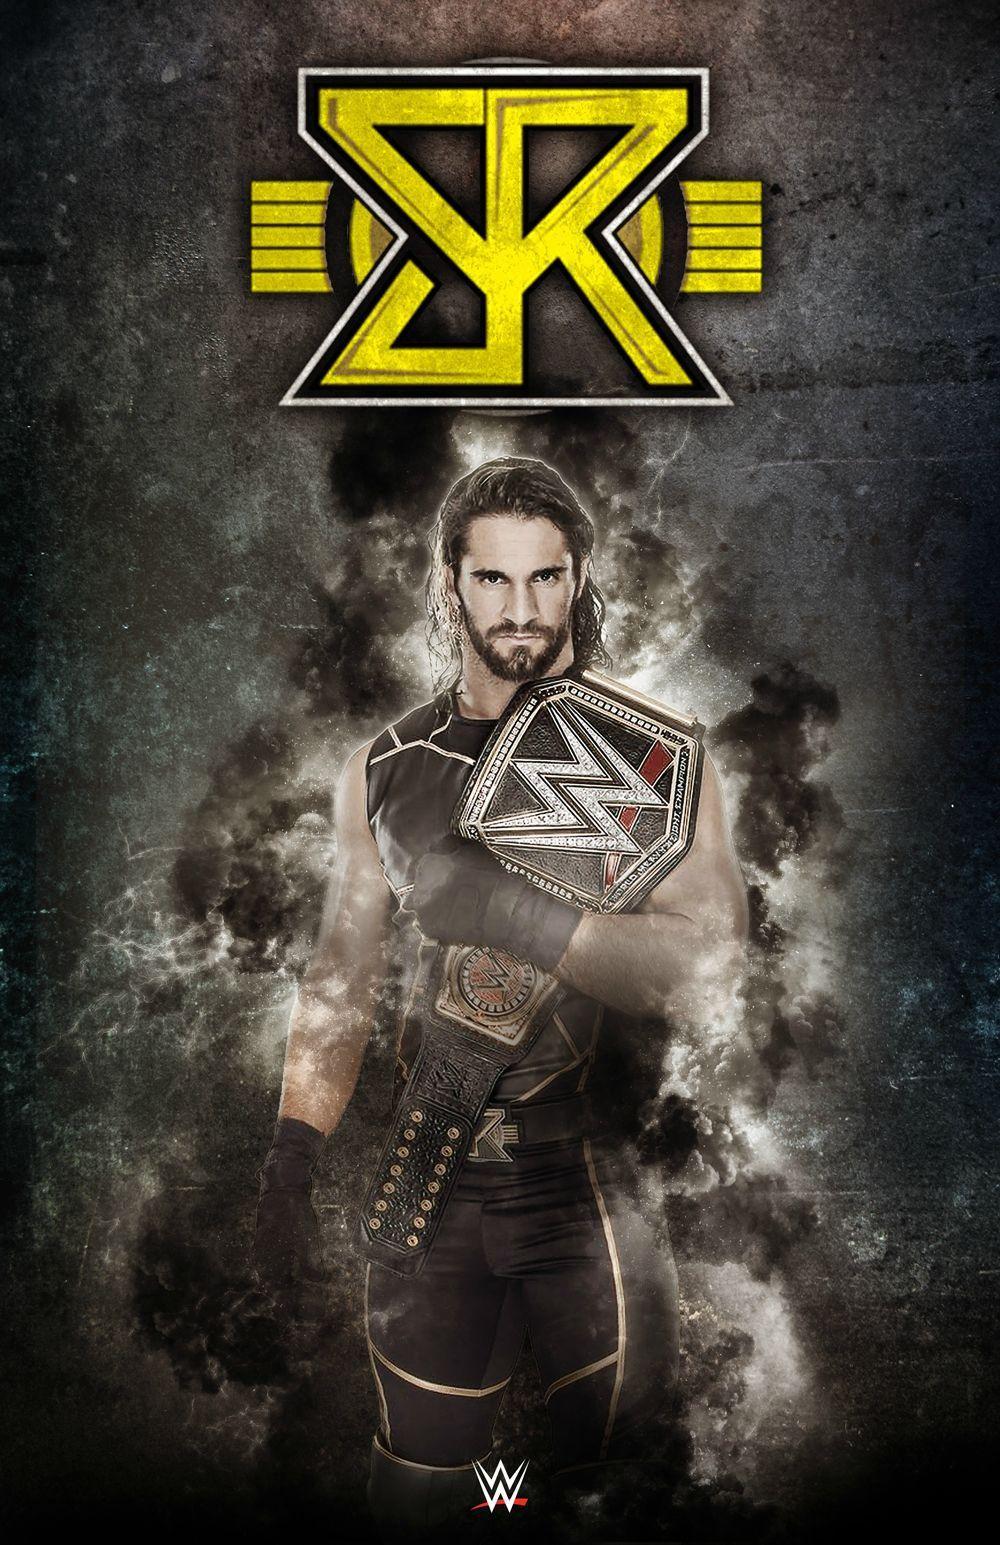 Back with another poster design. Seth Rollins